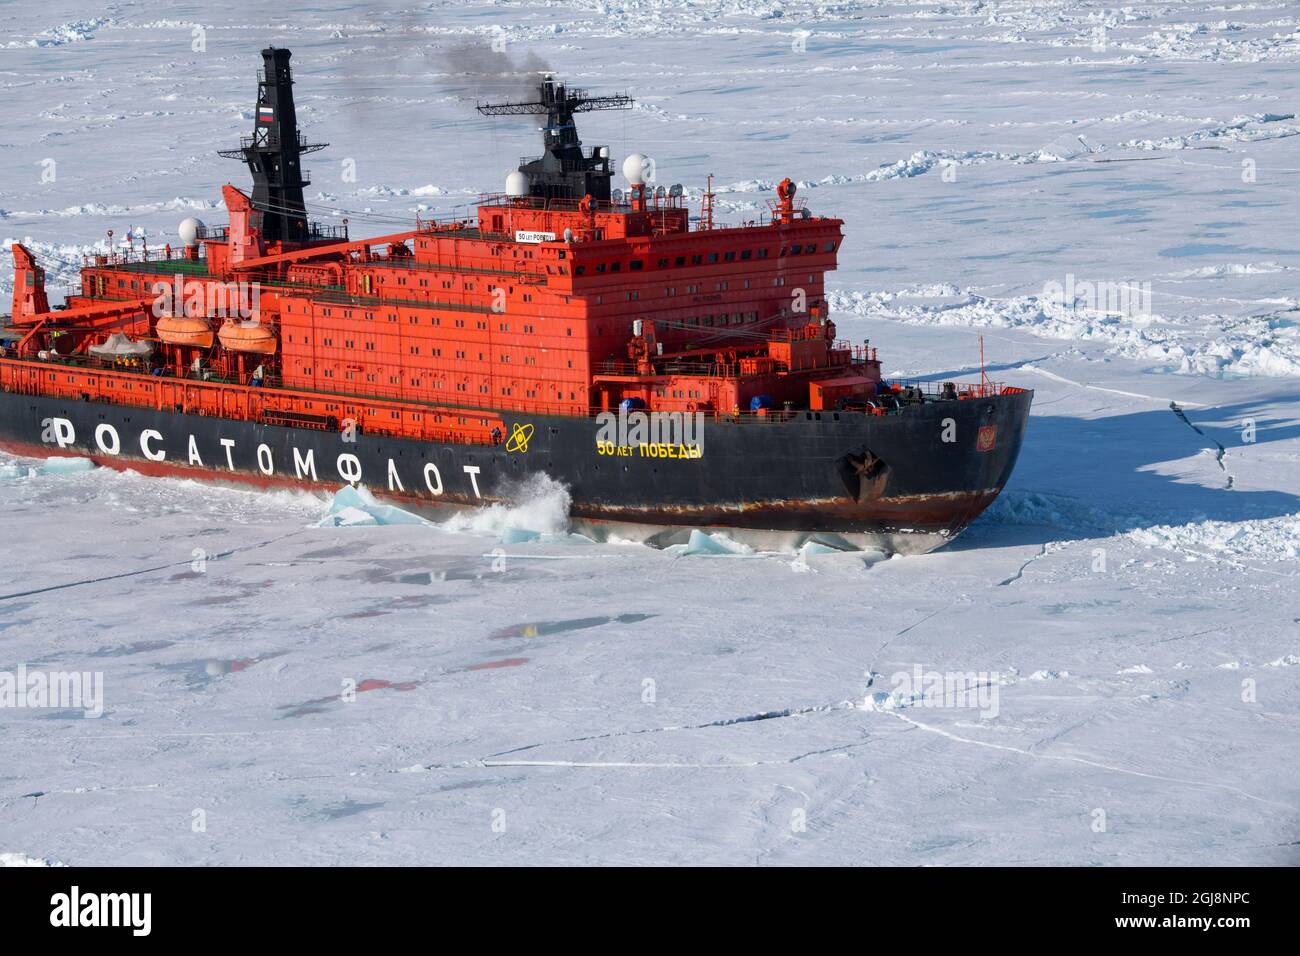 Russia. Aerial view of Russian nuclear icebreaker, 50 Years of Victory. Breaking through pack ice in High Arctic at 85.6 degrees north on the way to t Stock Photo